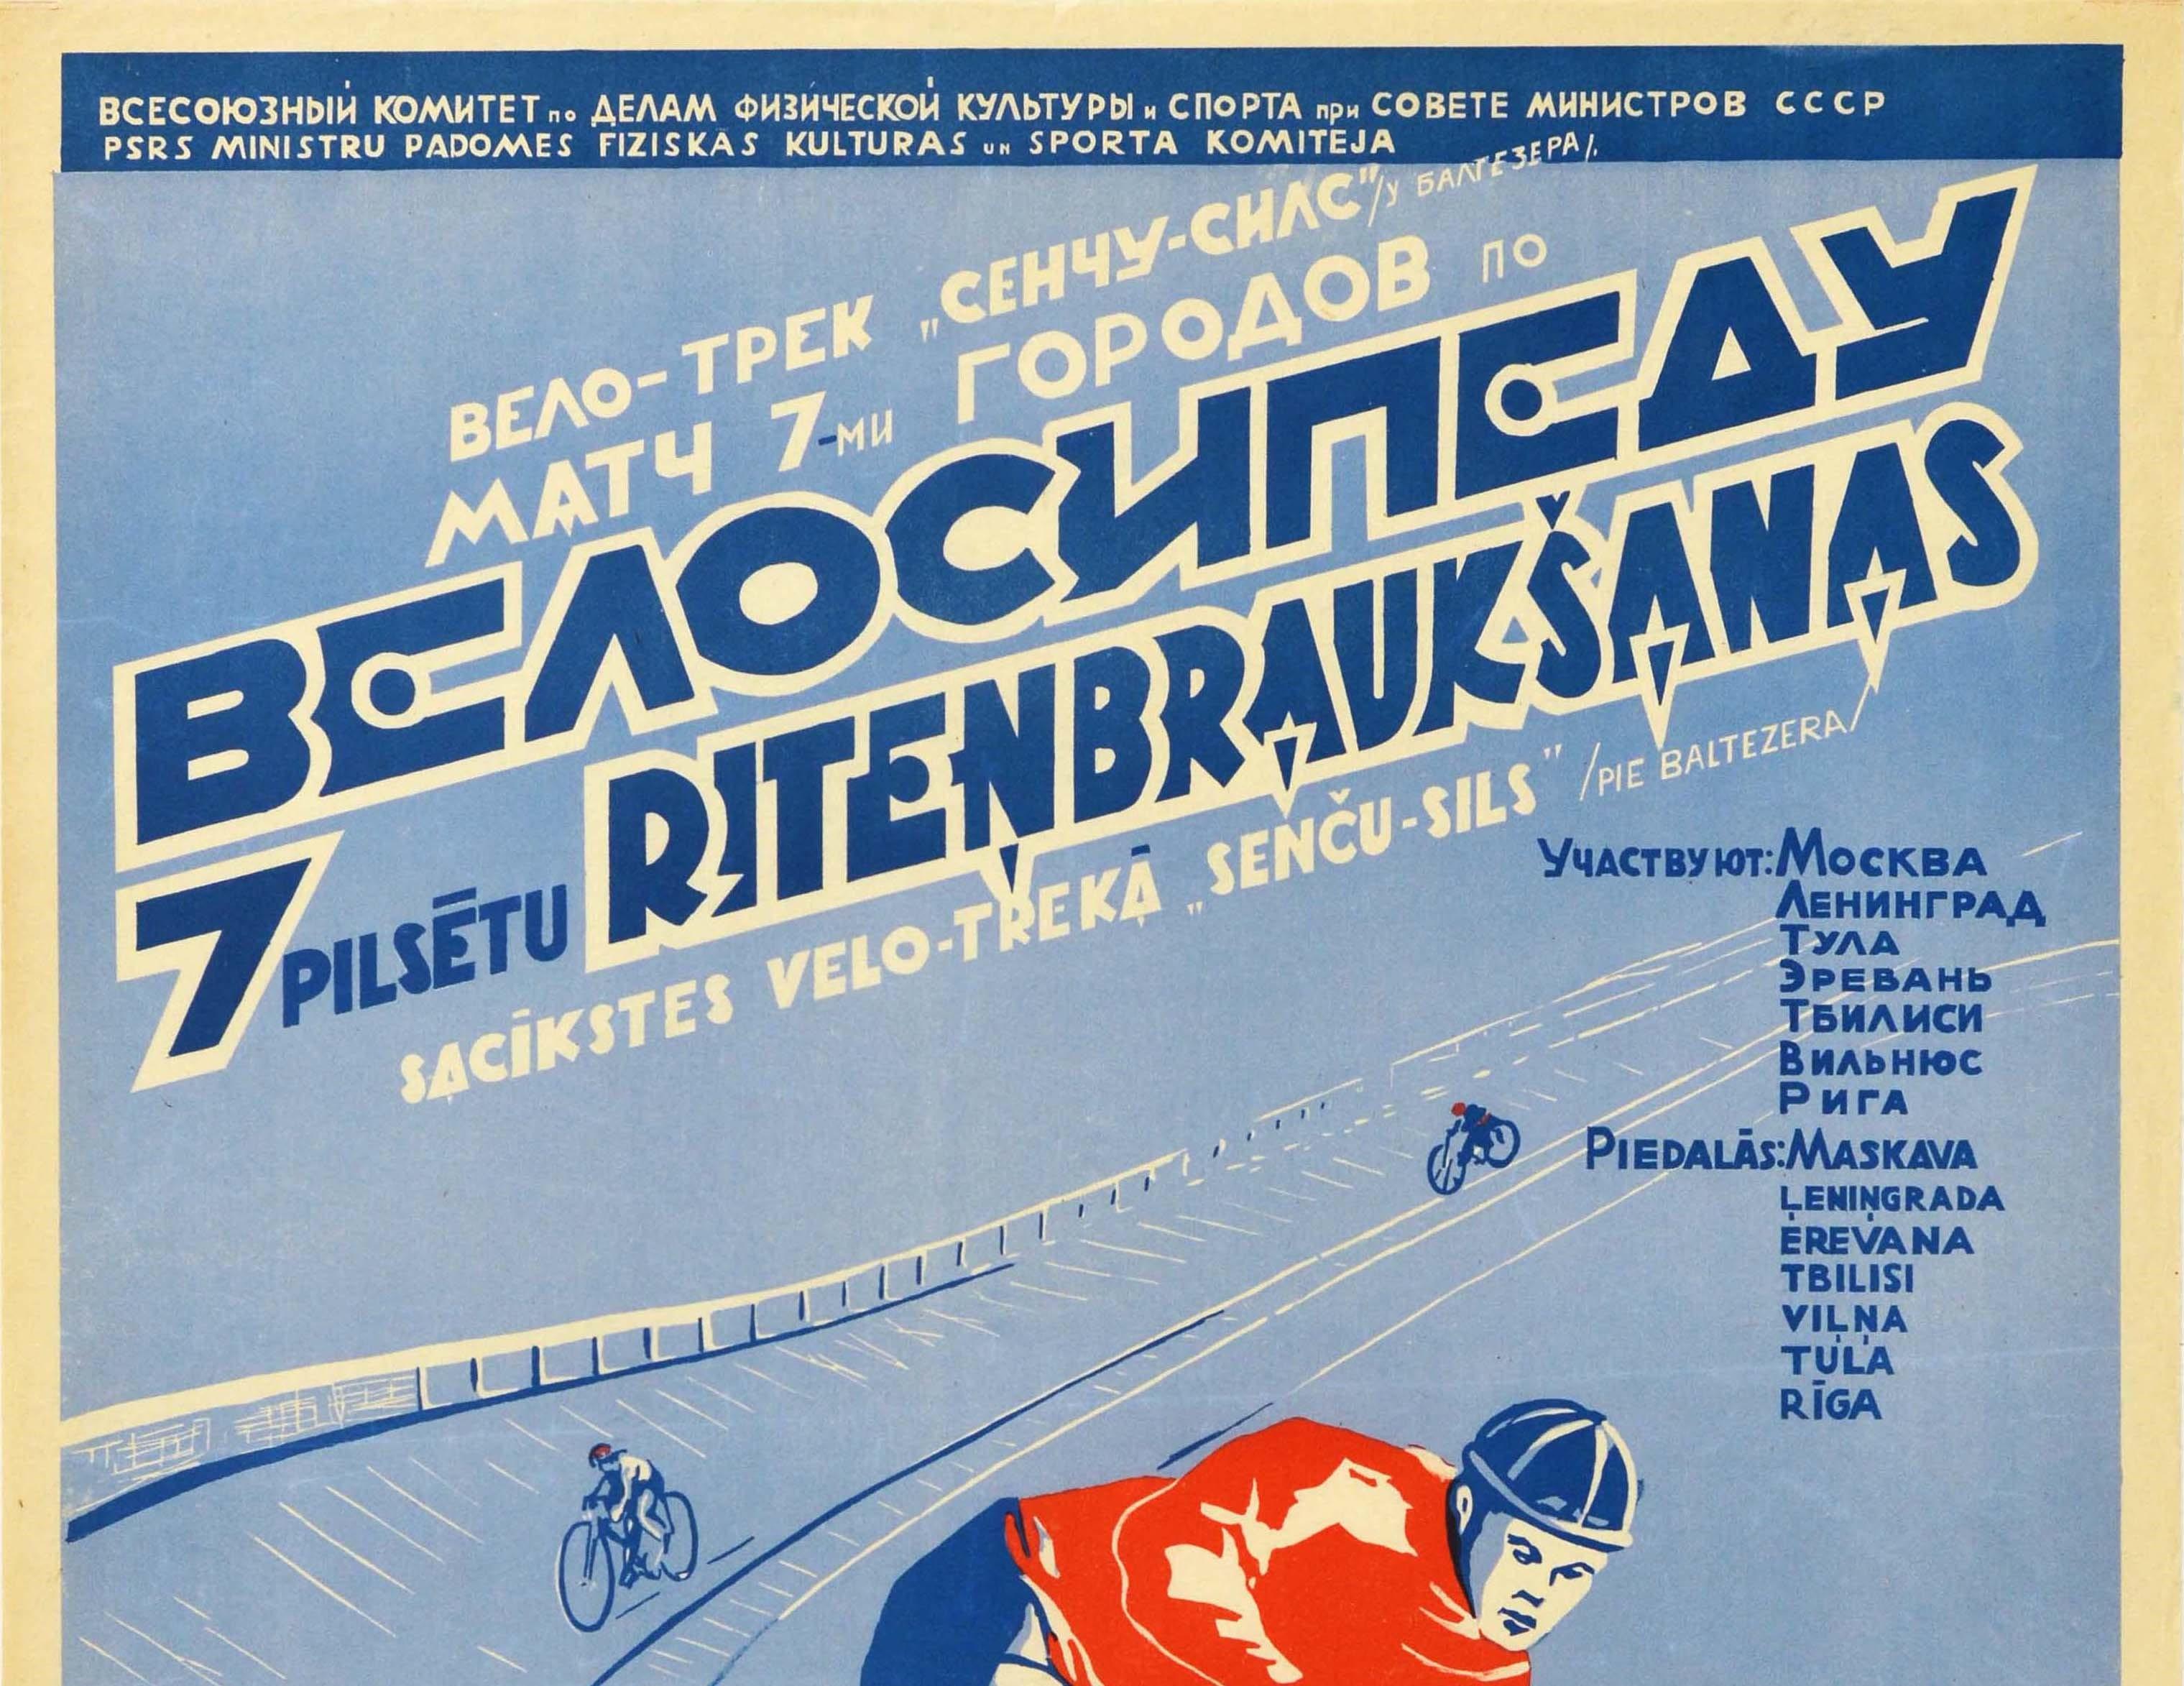 Original vintage Soviet sport poster for a 7 City Race between the cities of Moscow, Leningrad, Tula, Yerevan, Tbilisi, Vilnius and Riga in Latvia, Russia, Georgia, Armenia and Lithuania on the Senchu Sils cycling track near Baltezers in Latvia on